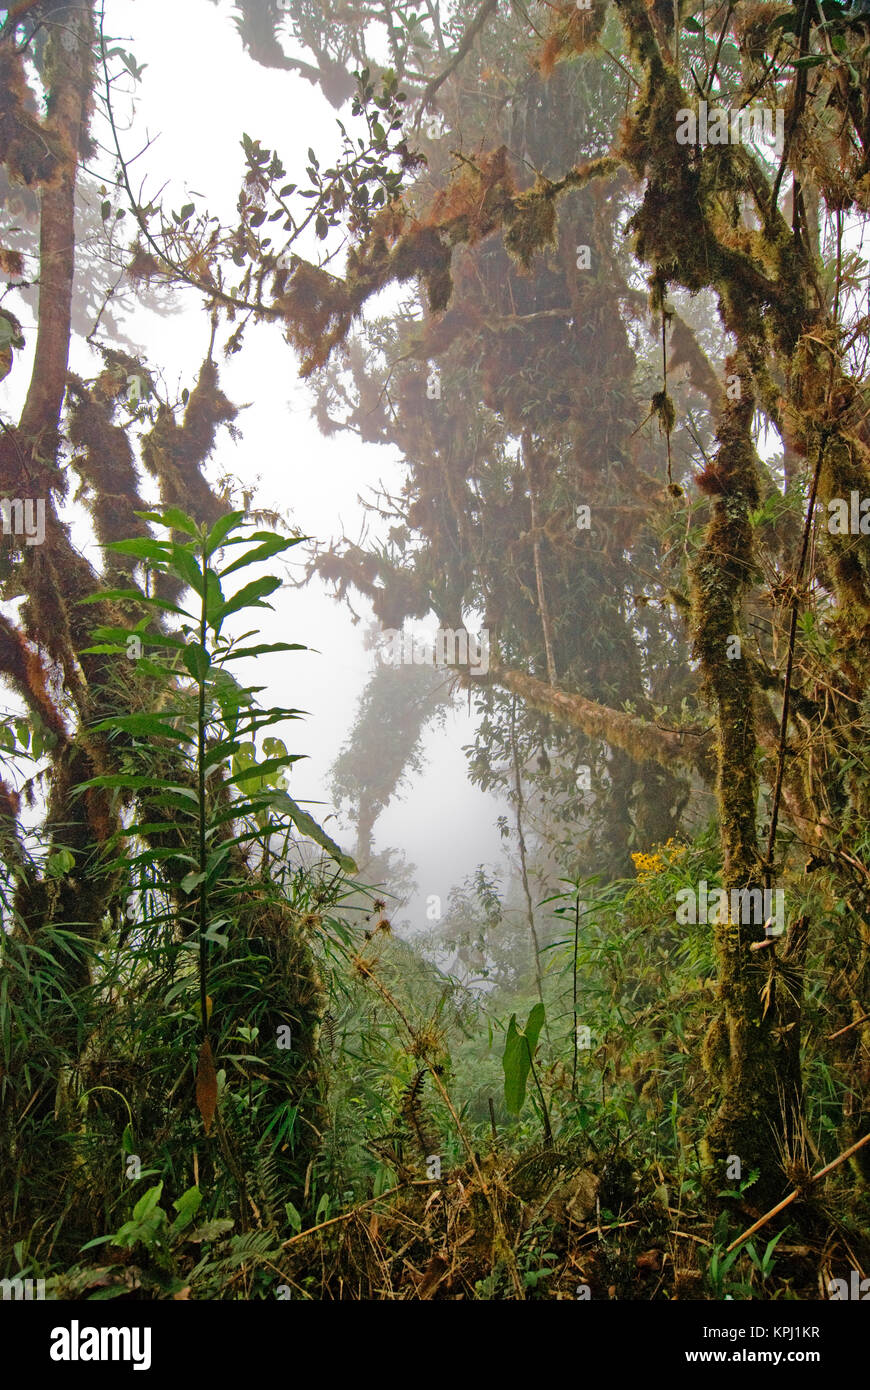 Peru. Andes Mountains. Amazonas Province. Upper Amazon. Cloud forest. Stock Photo